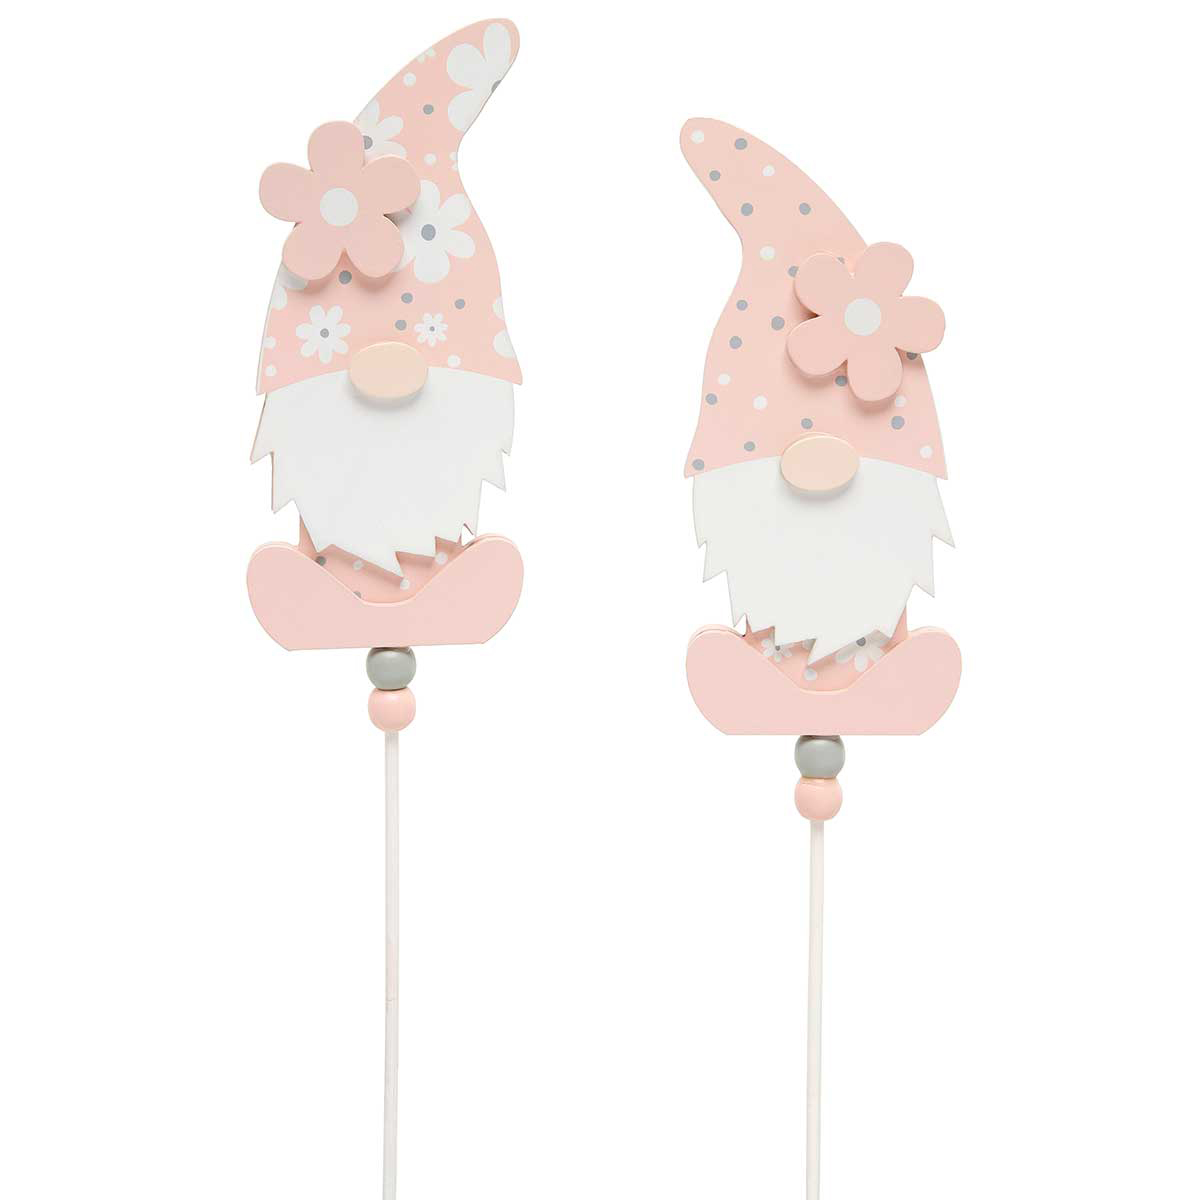 b50 WHOOPSIE WOOD GNOME ON STICK PINK/WHITE PINDOT/DAISY